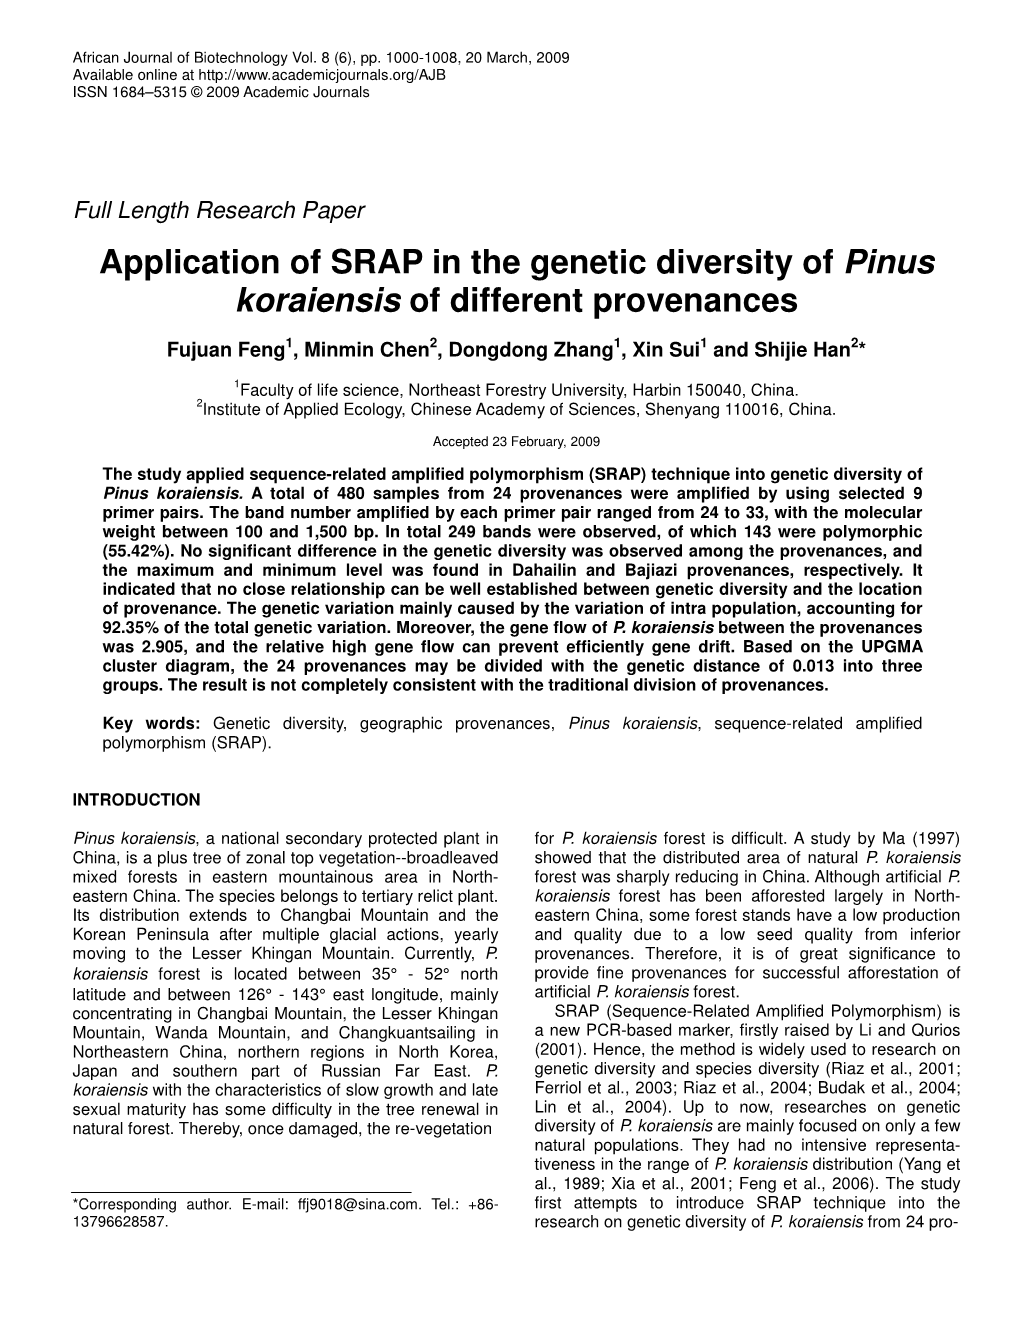 Application of SRAP in the Genetic Diversity of Pinus Koraiensis of Different Provenances